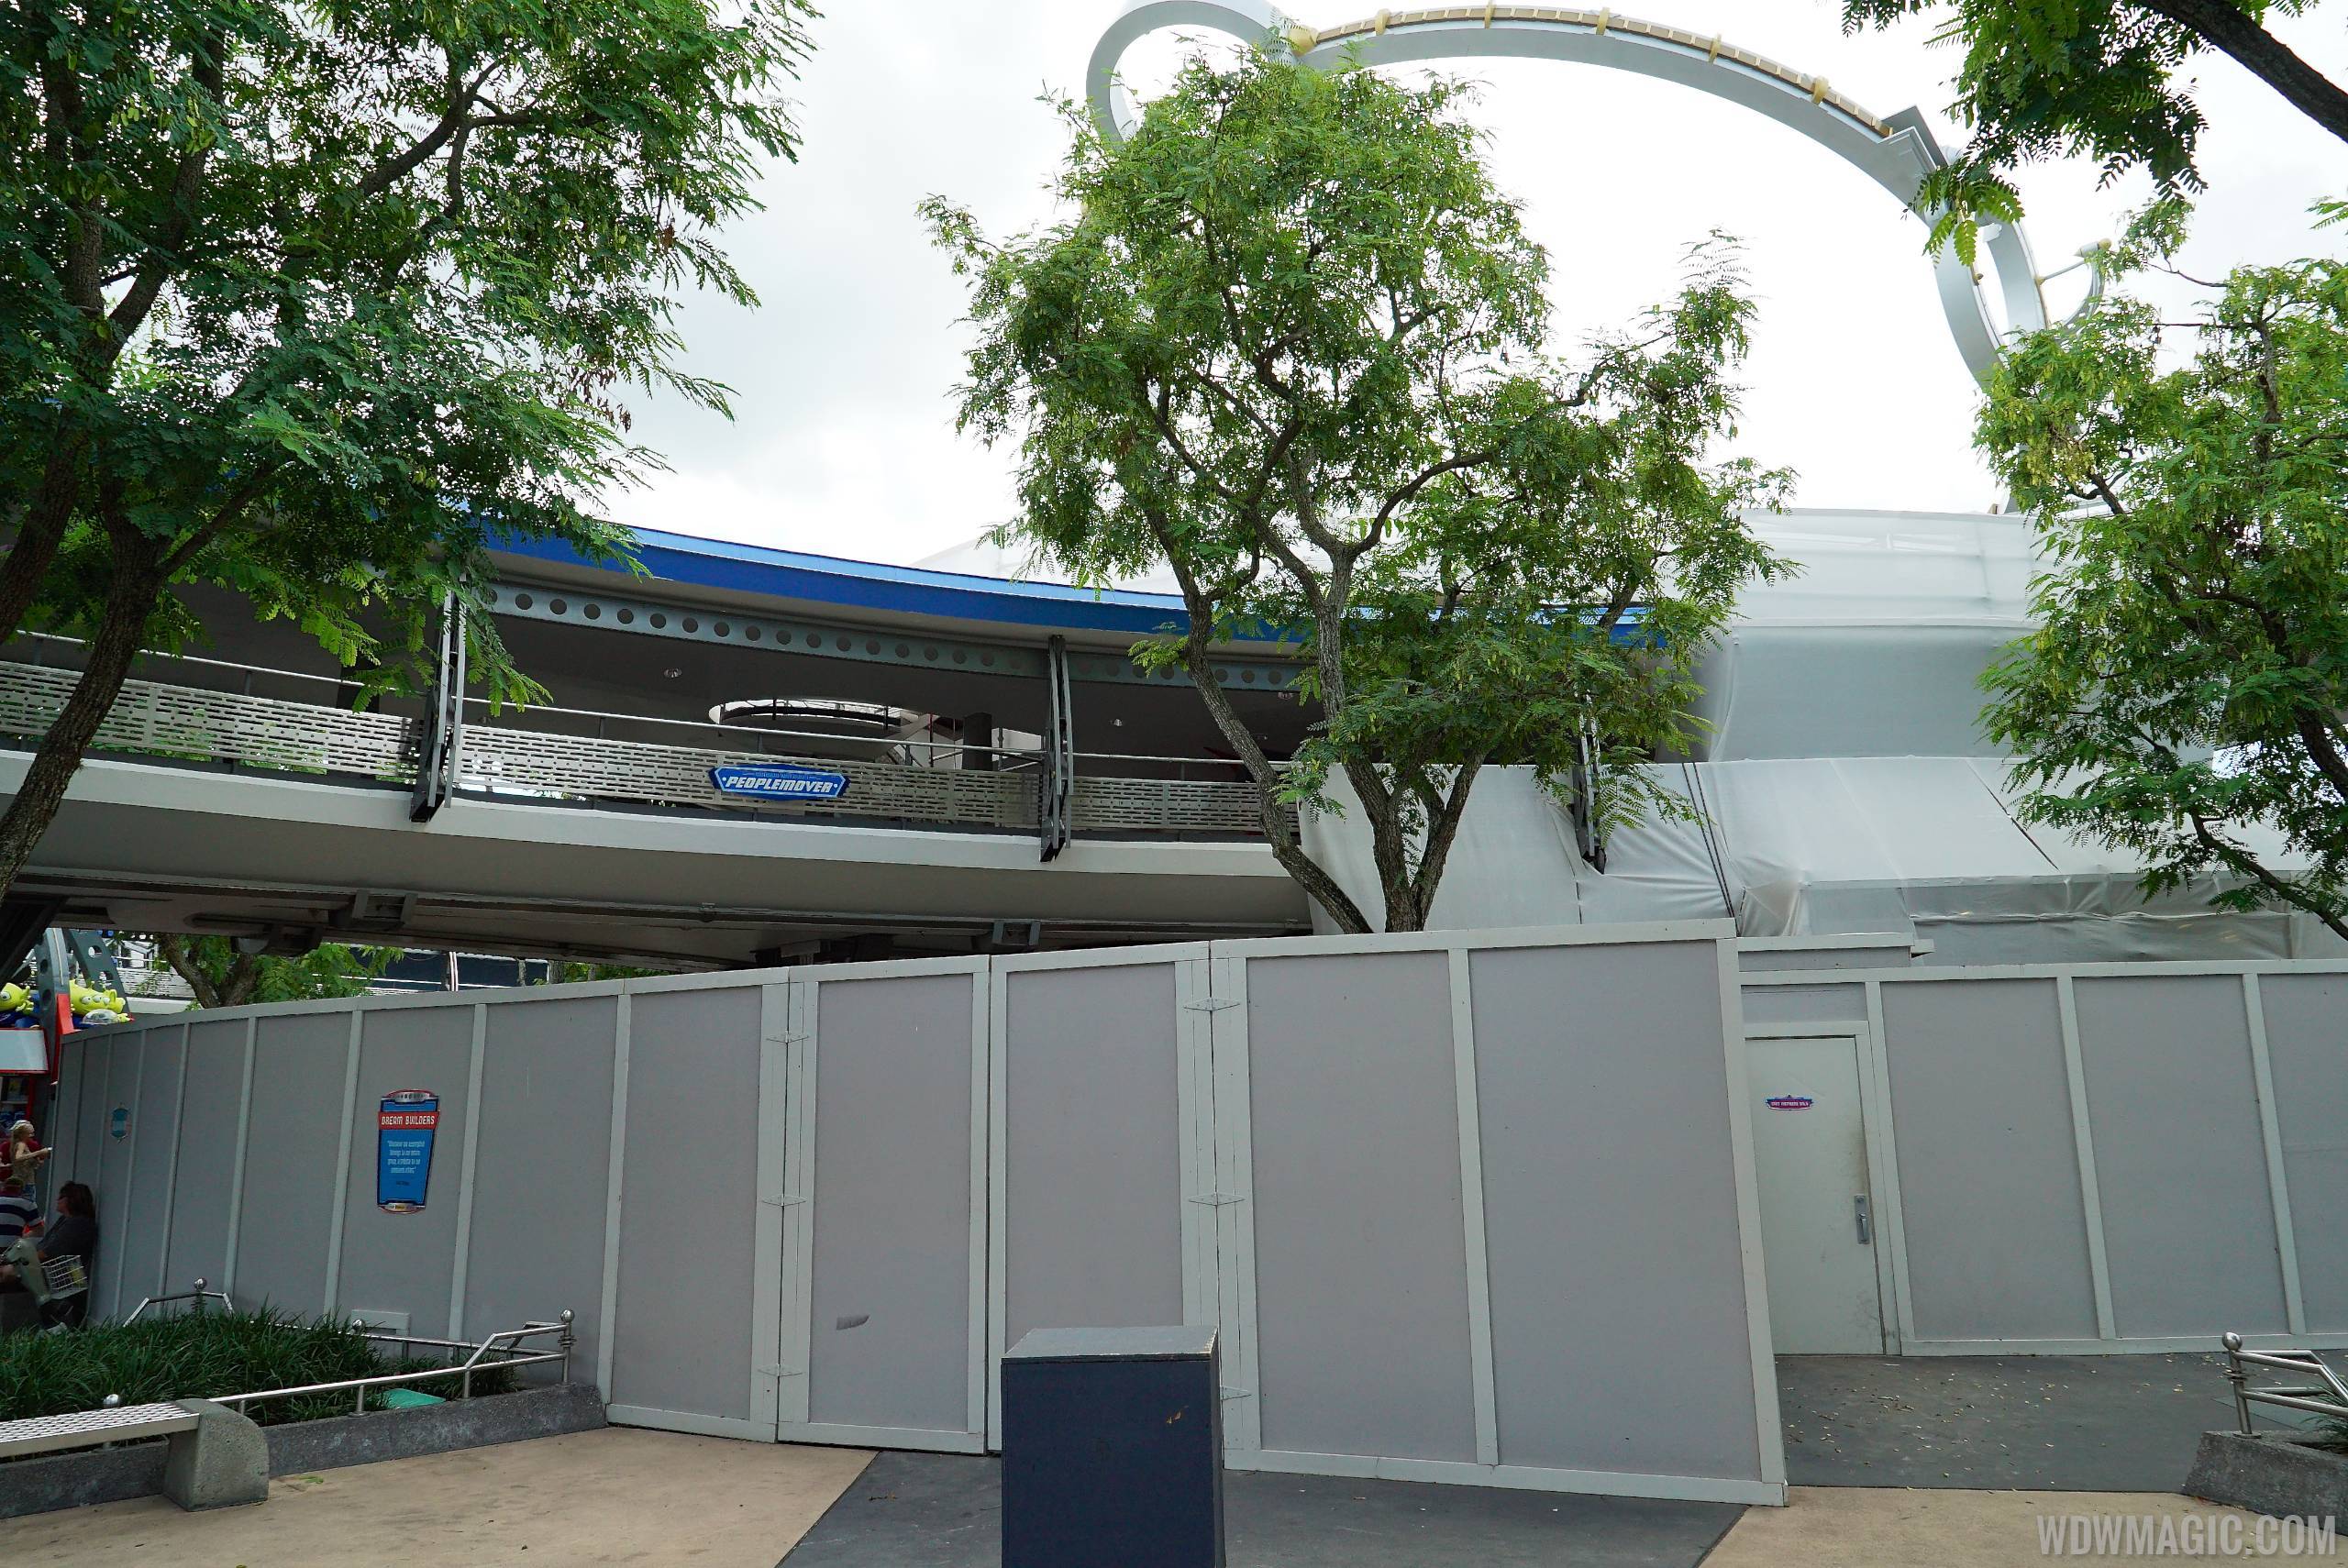 Astro Orbiter refurbishment extended by a week